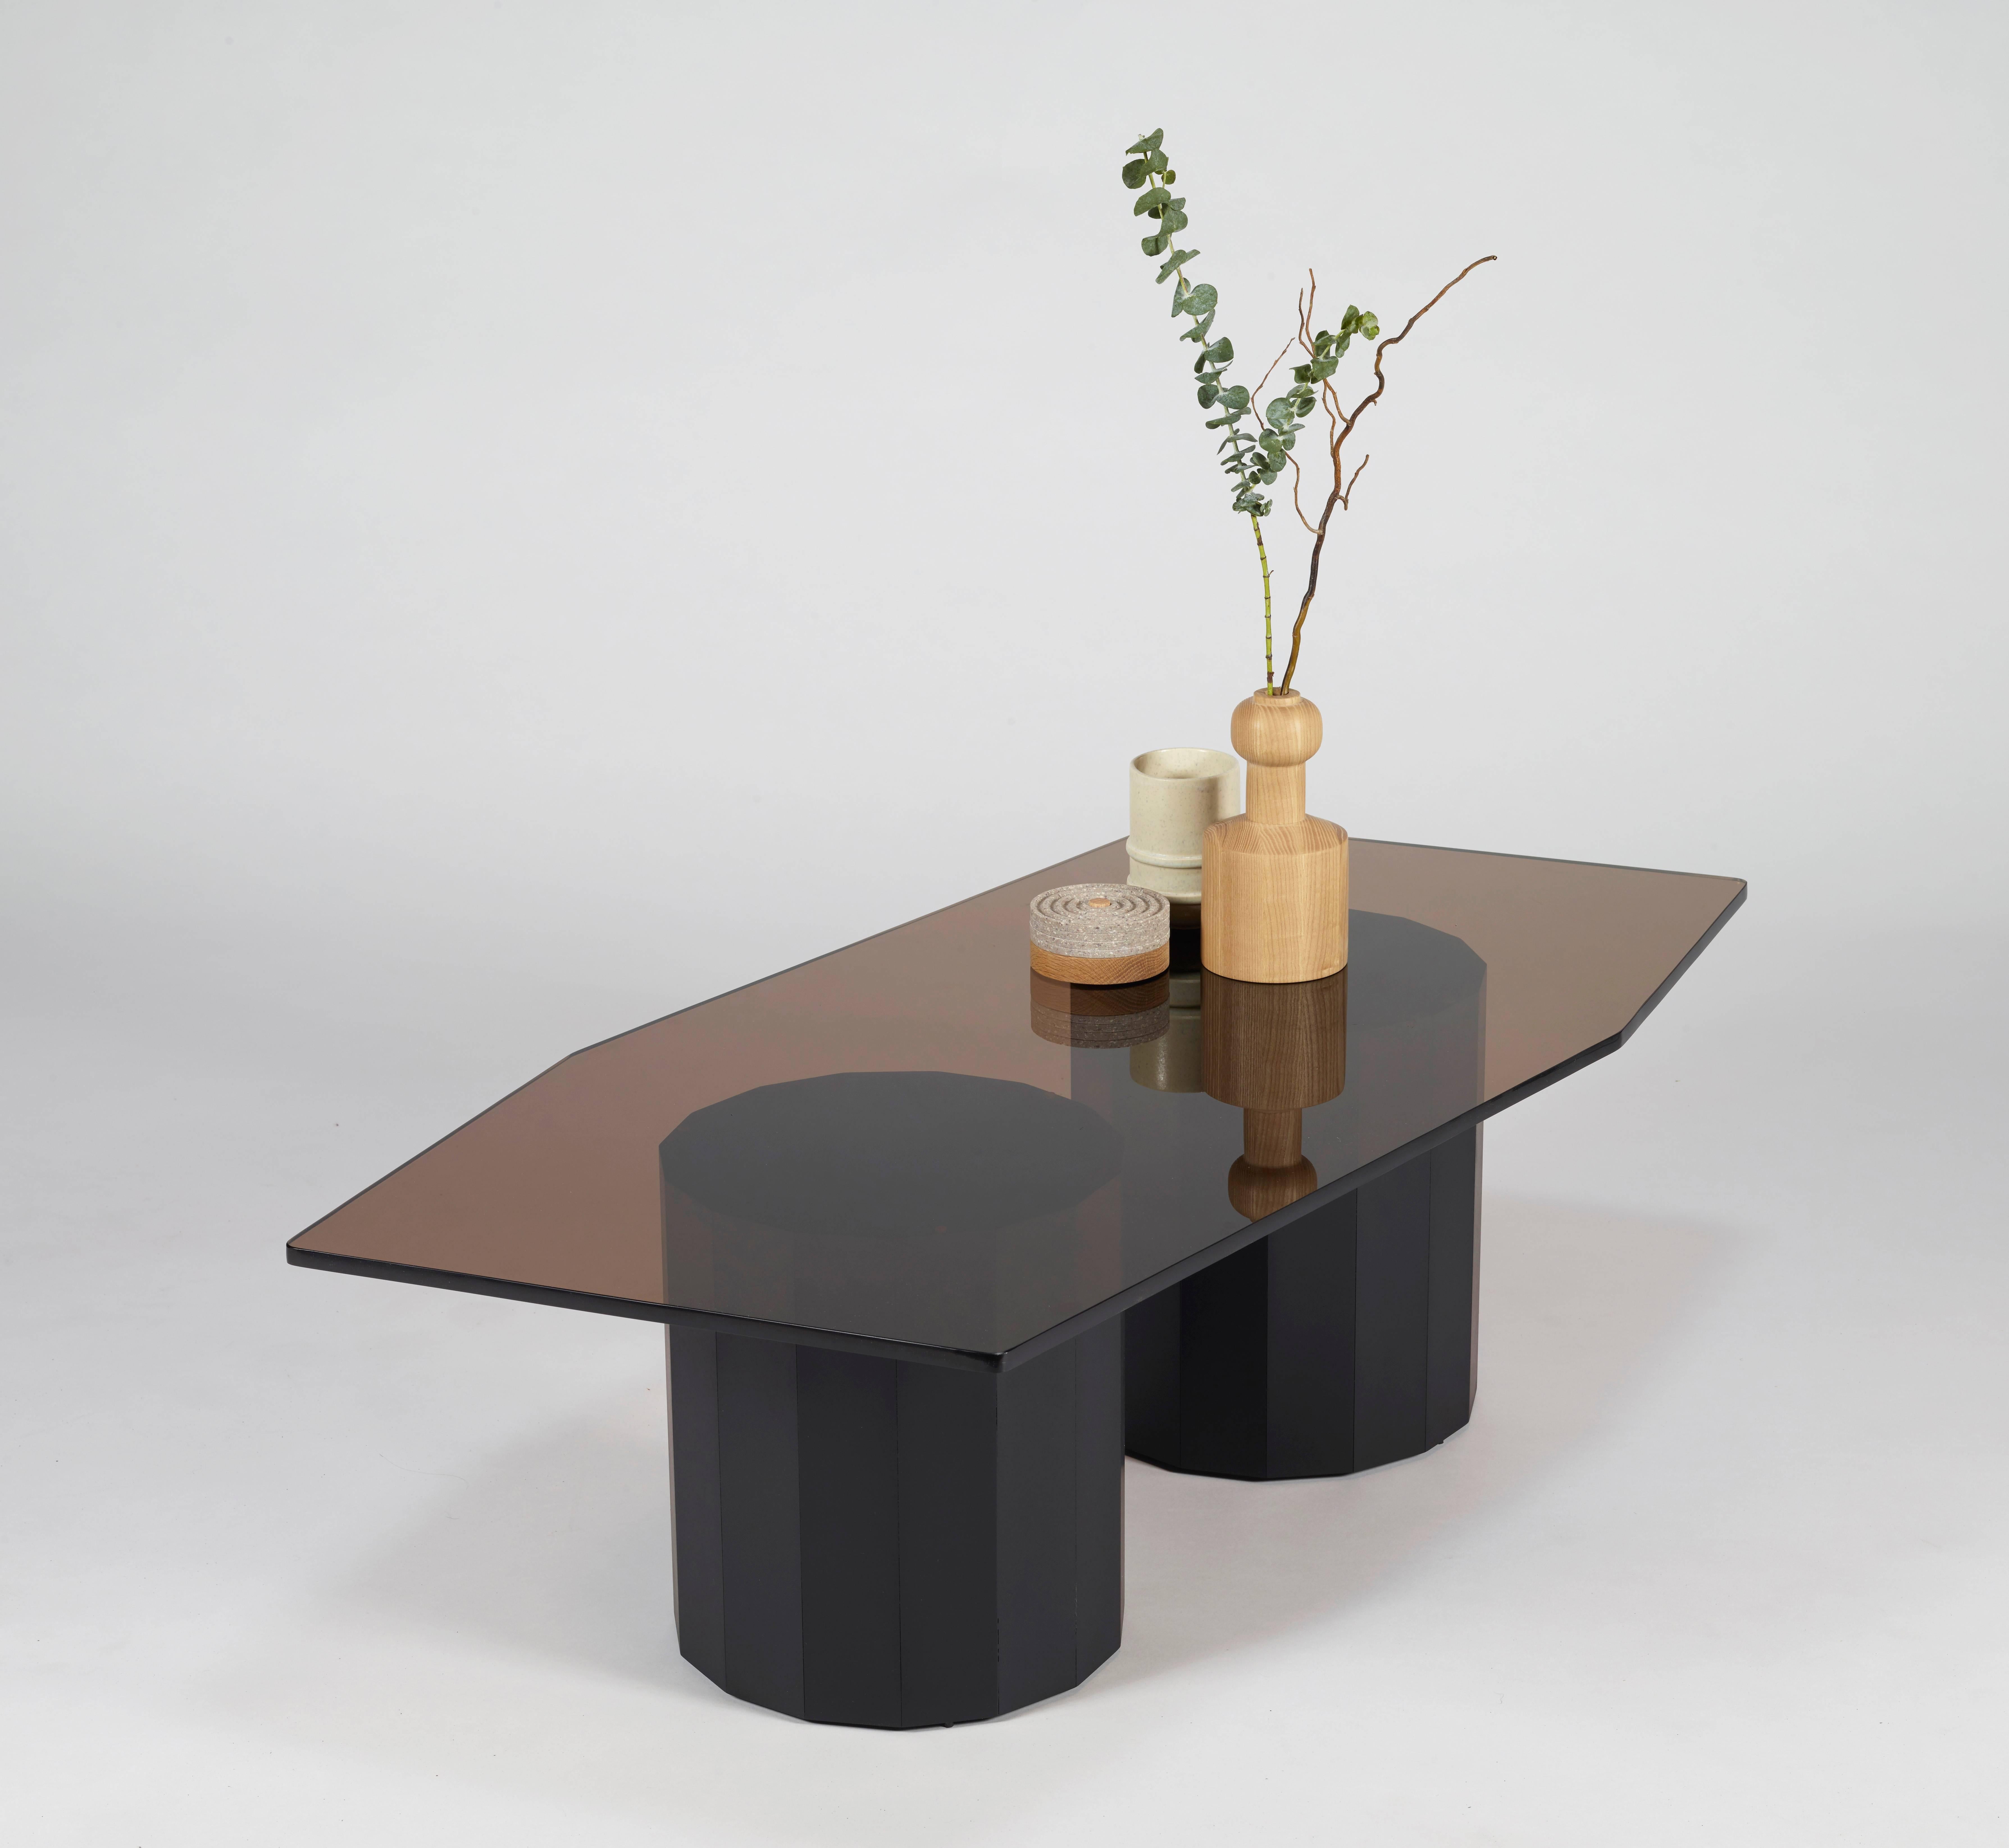 A minimal coffee table with a bronze glass top and a paperstone base.
Inspired by the brutalist architecture of Paul Rudolph with its skewed non-rectilinear top.